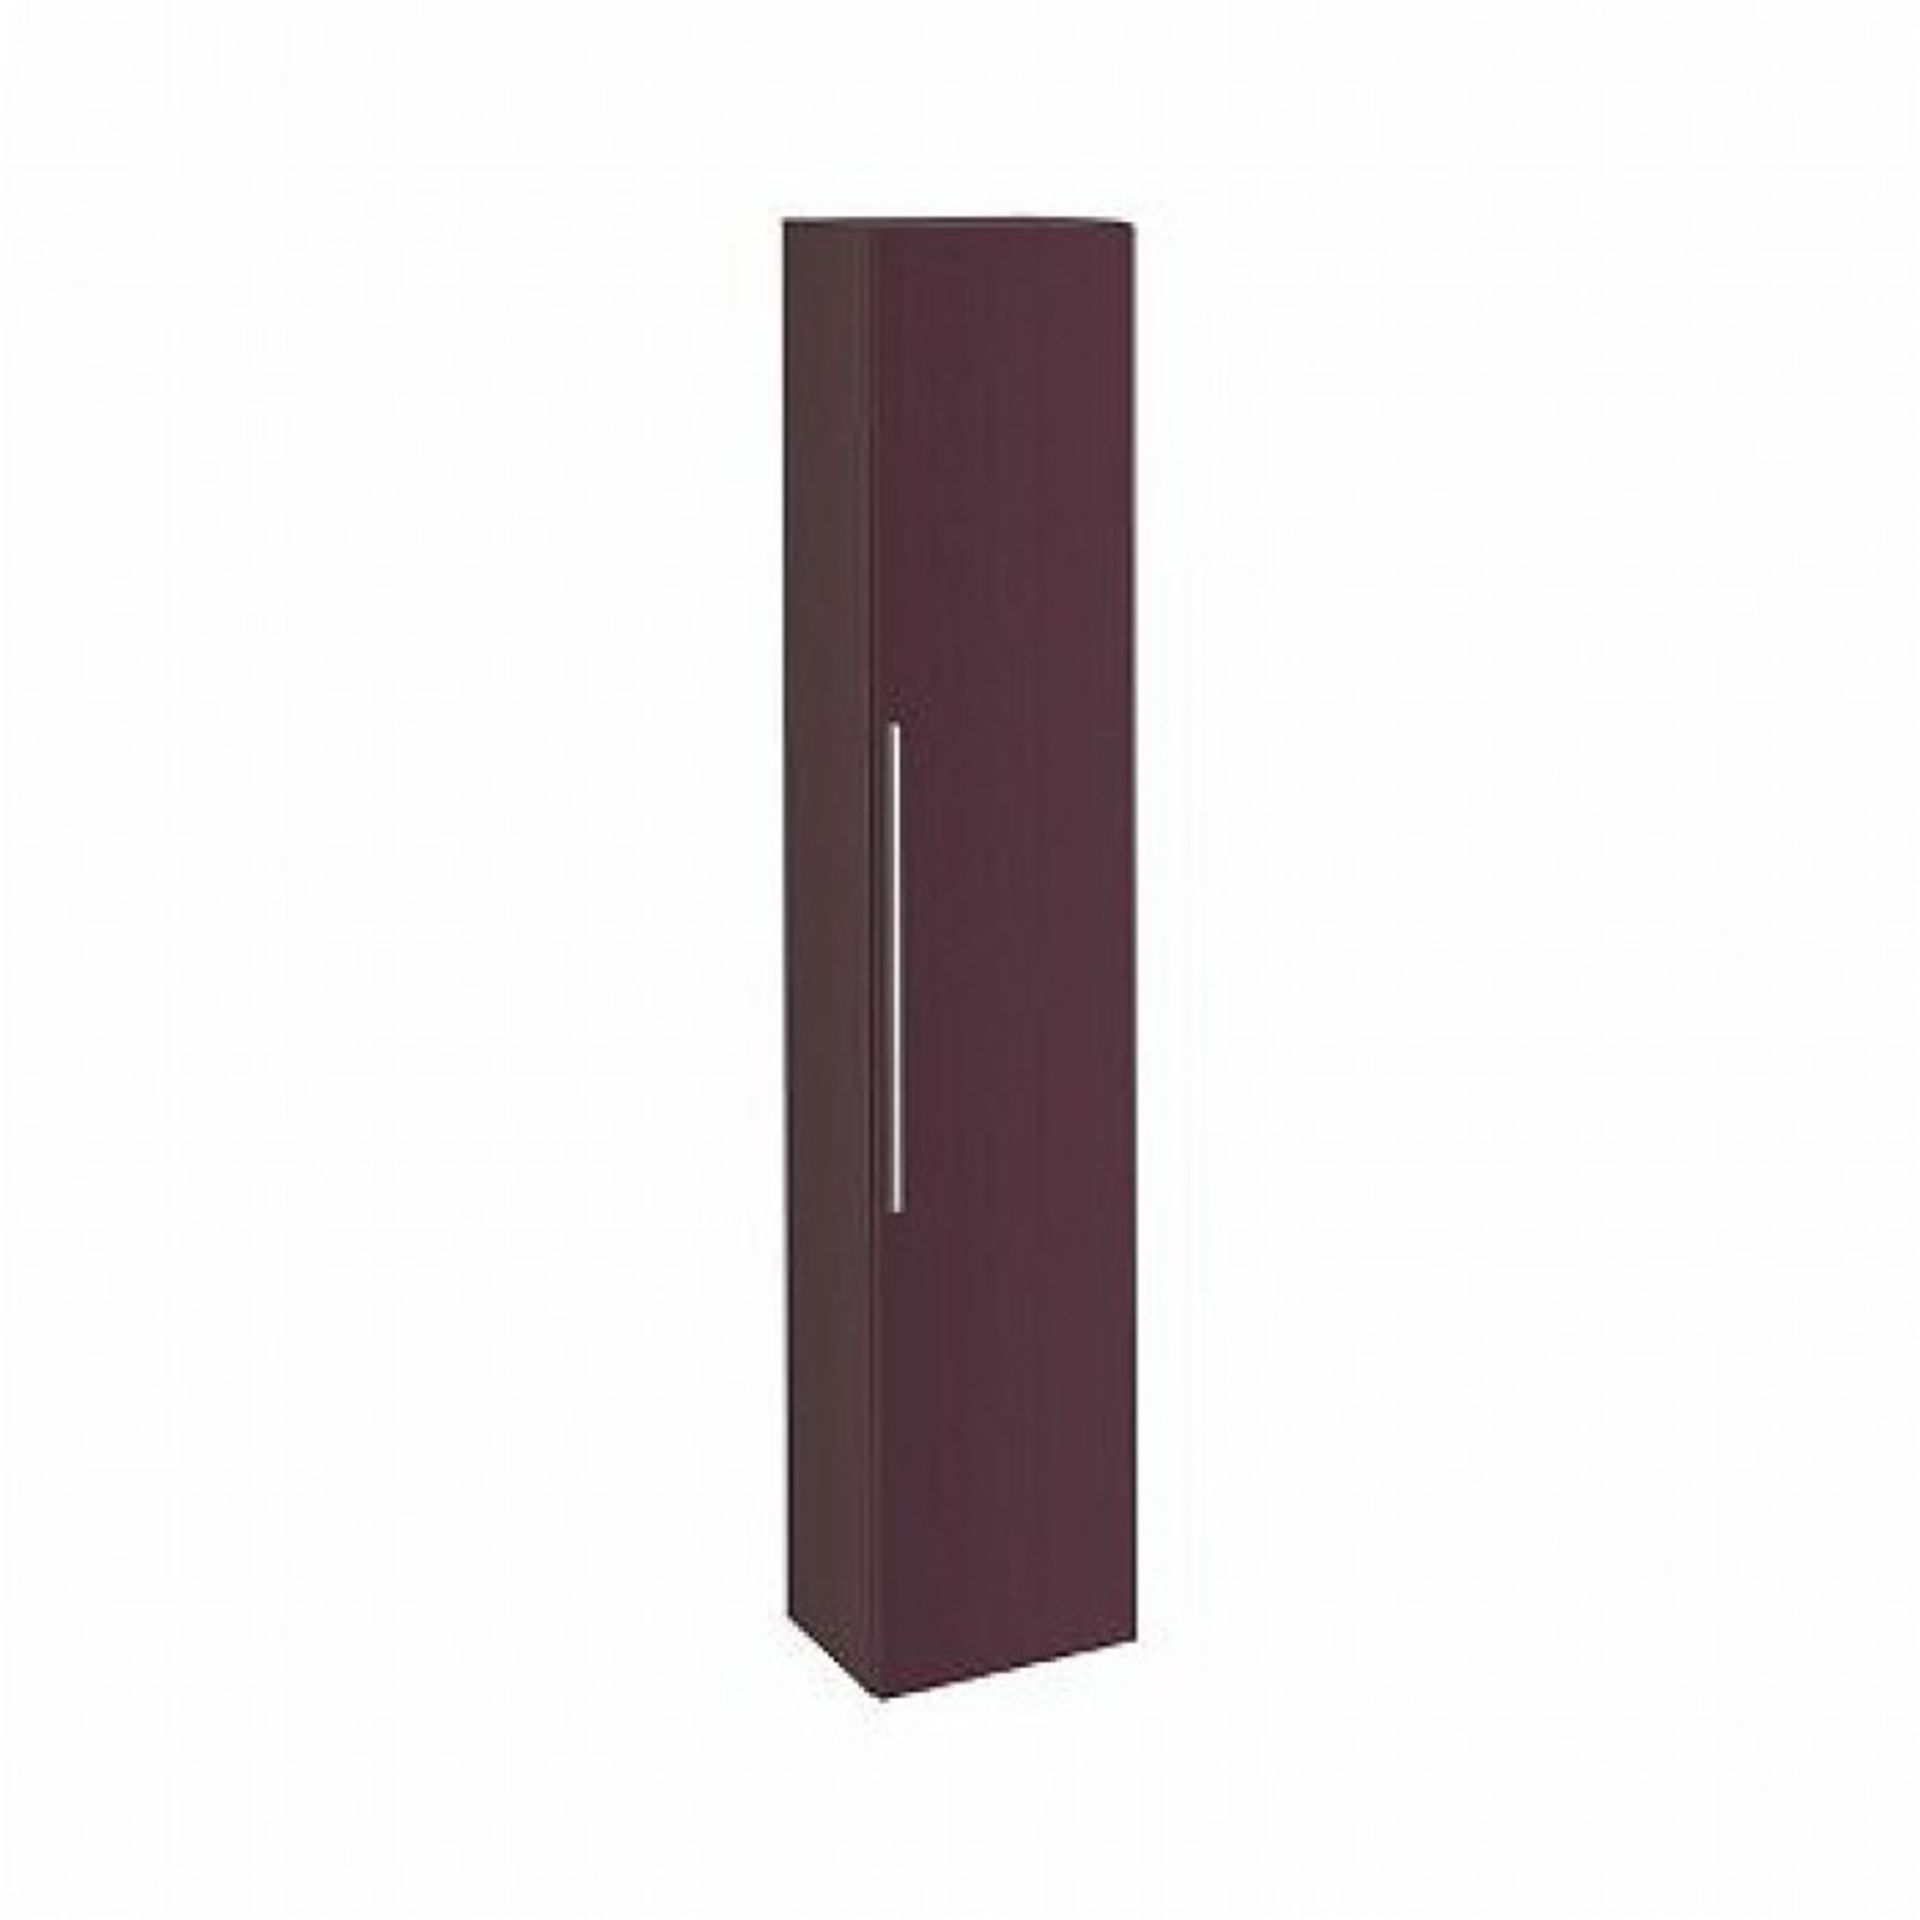 (XL144) Keramag iCon 1800mm Burgendy high gloss Side Cabinet Unit. RRP £459.99. Add a pop of c...( - Image 2 of 3